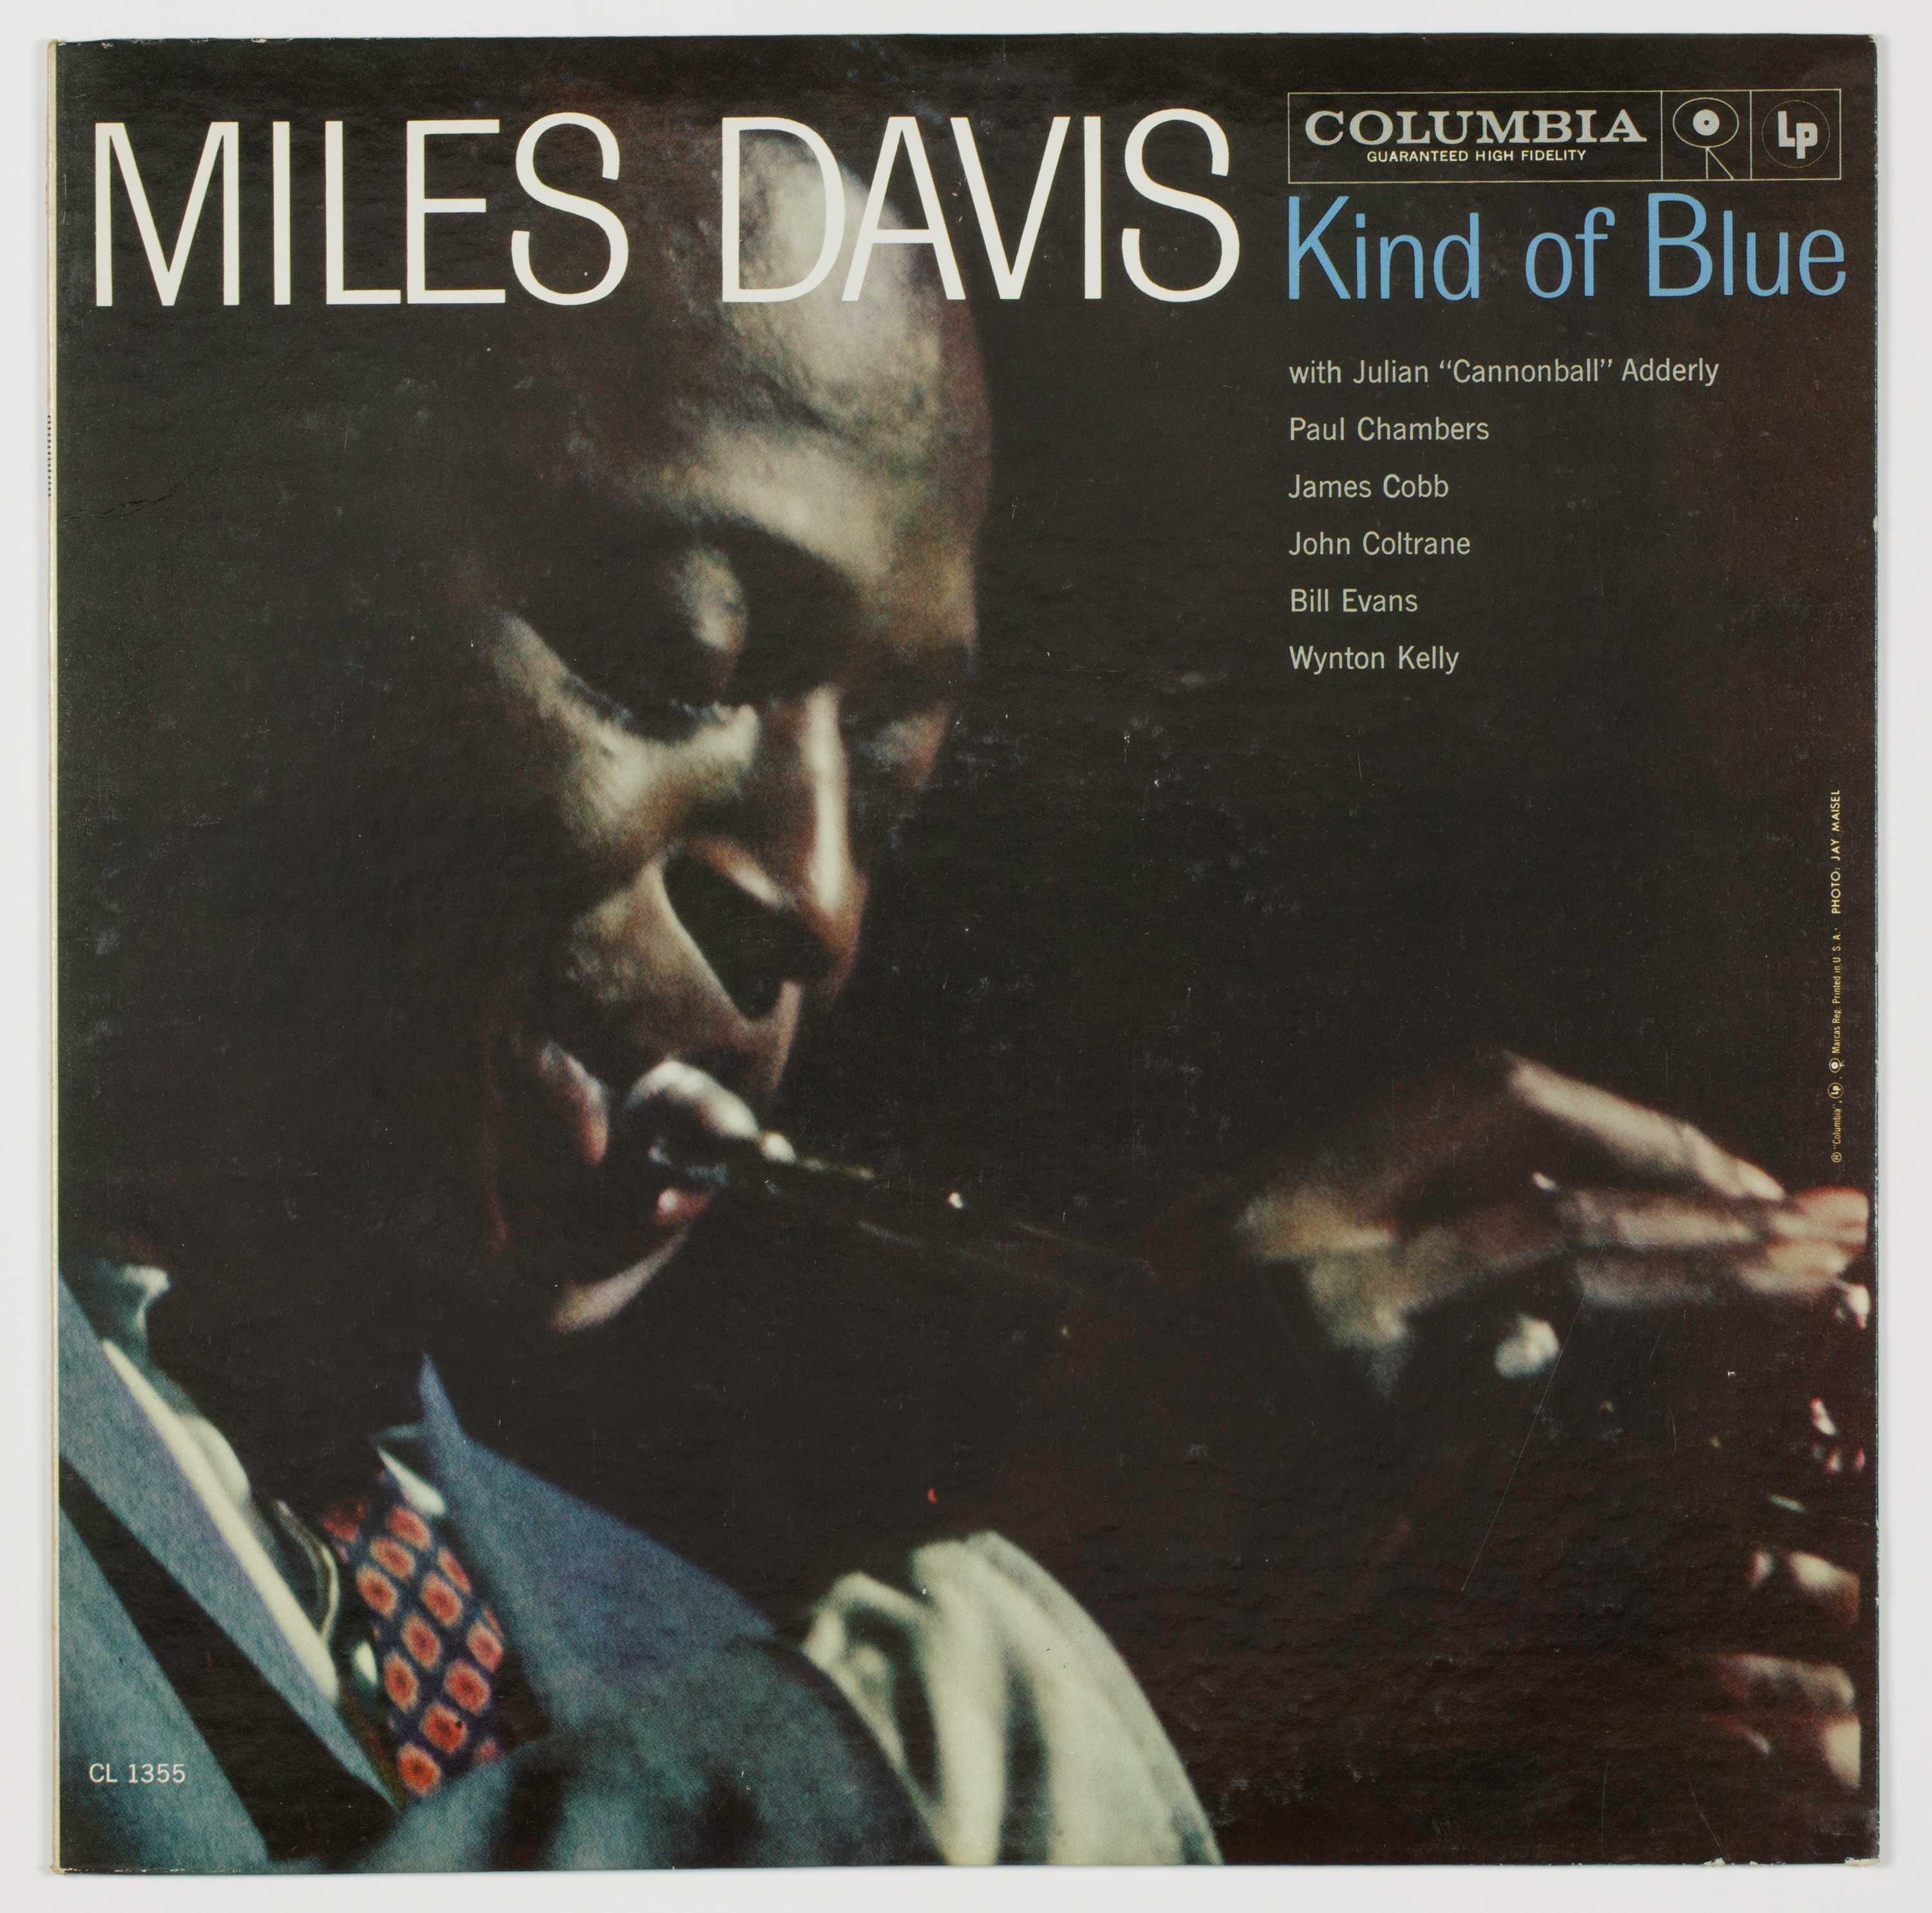 The cover of an LP recording of the album "Kind of Blue" by Miles Davis. The cover features Davis playing his trumpet.